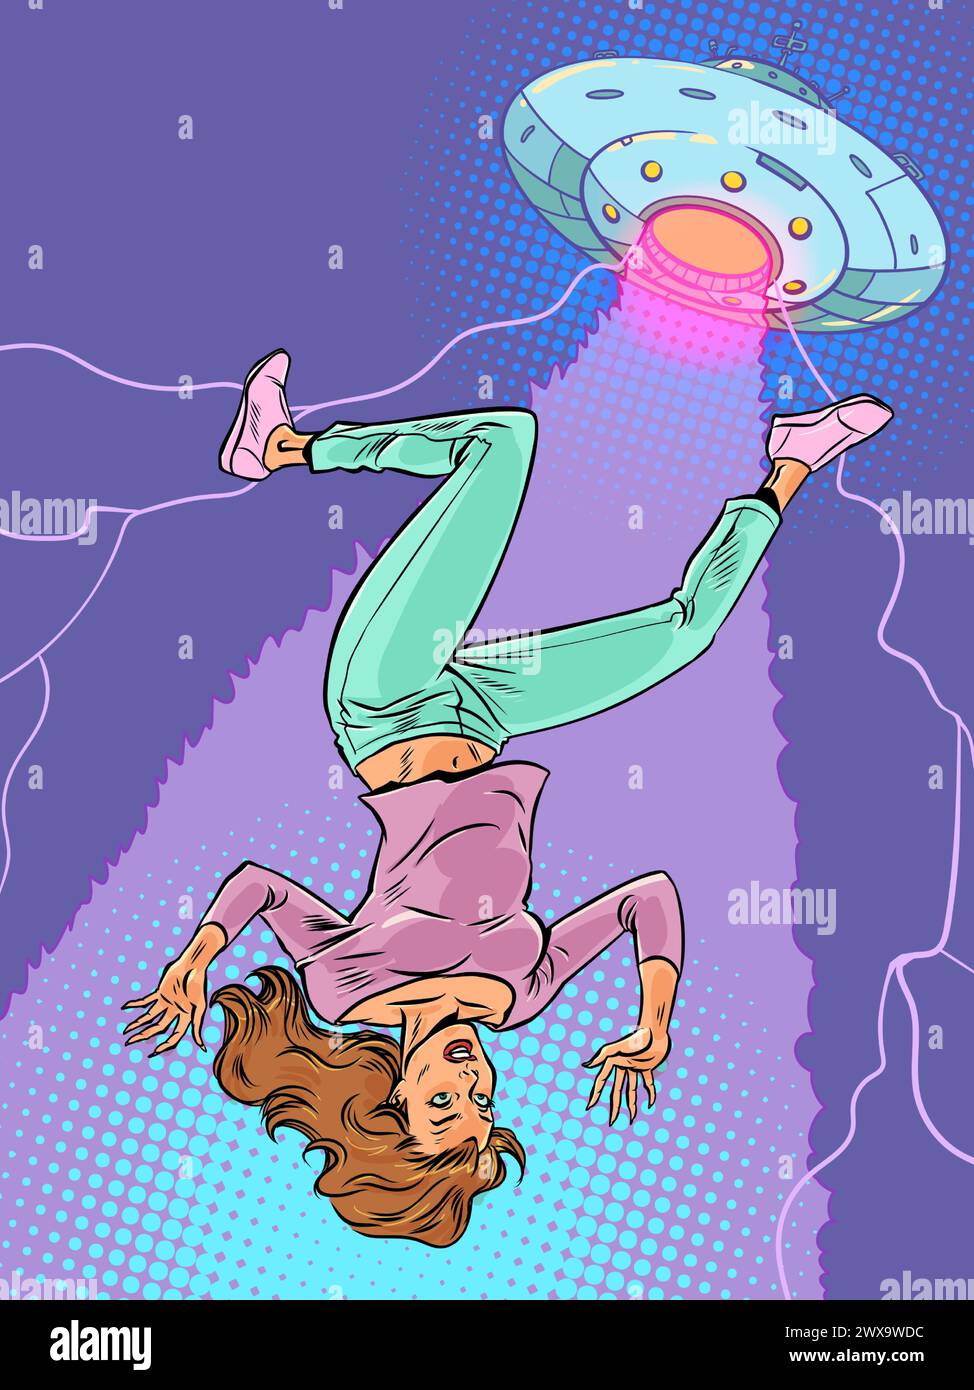 A woman is lifted up on a beam by a cosmic saucer. Alien invasion and abduction of earth. Exploration of other life in the universe. Pop Art Retro Vec Stock Vector